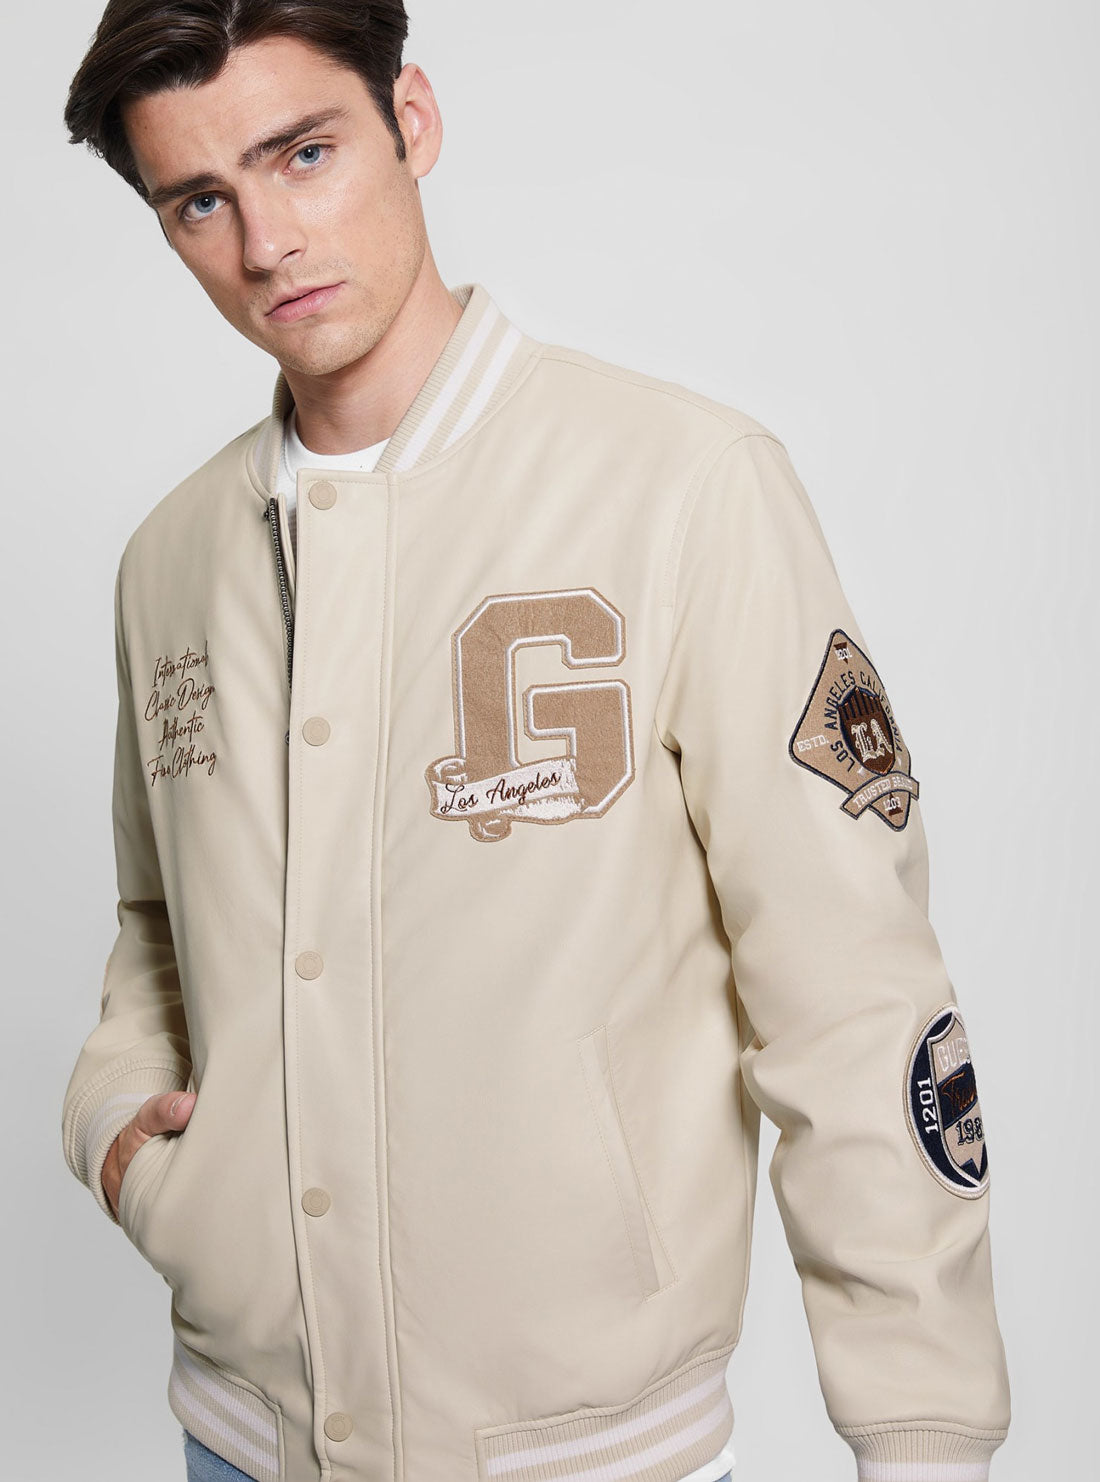 GUESS Beige Varsity Bomber Jacket detail view